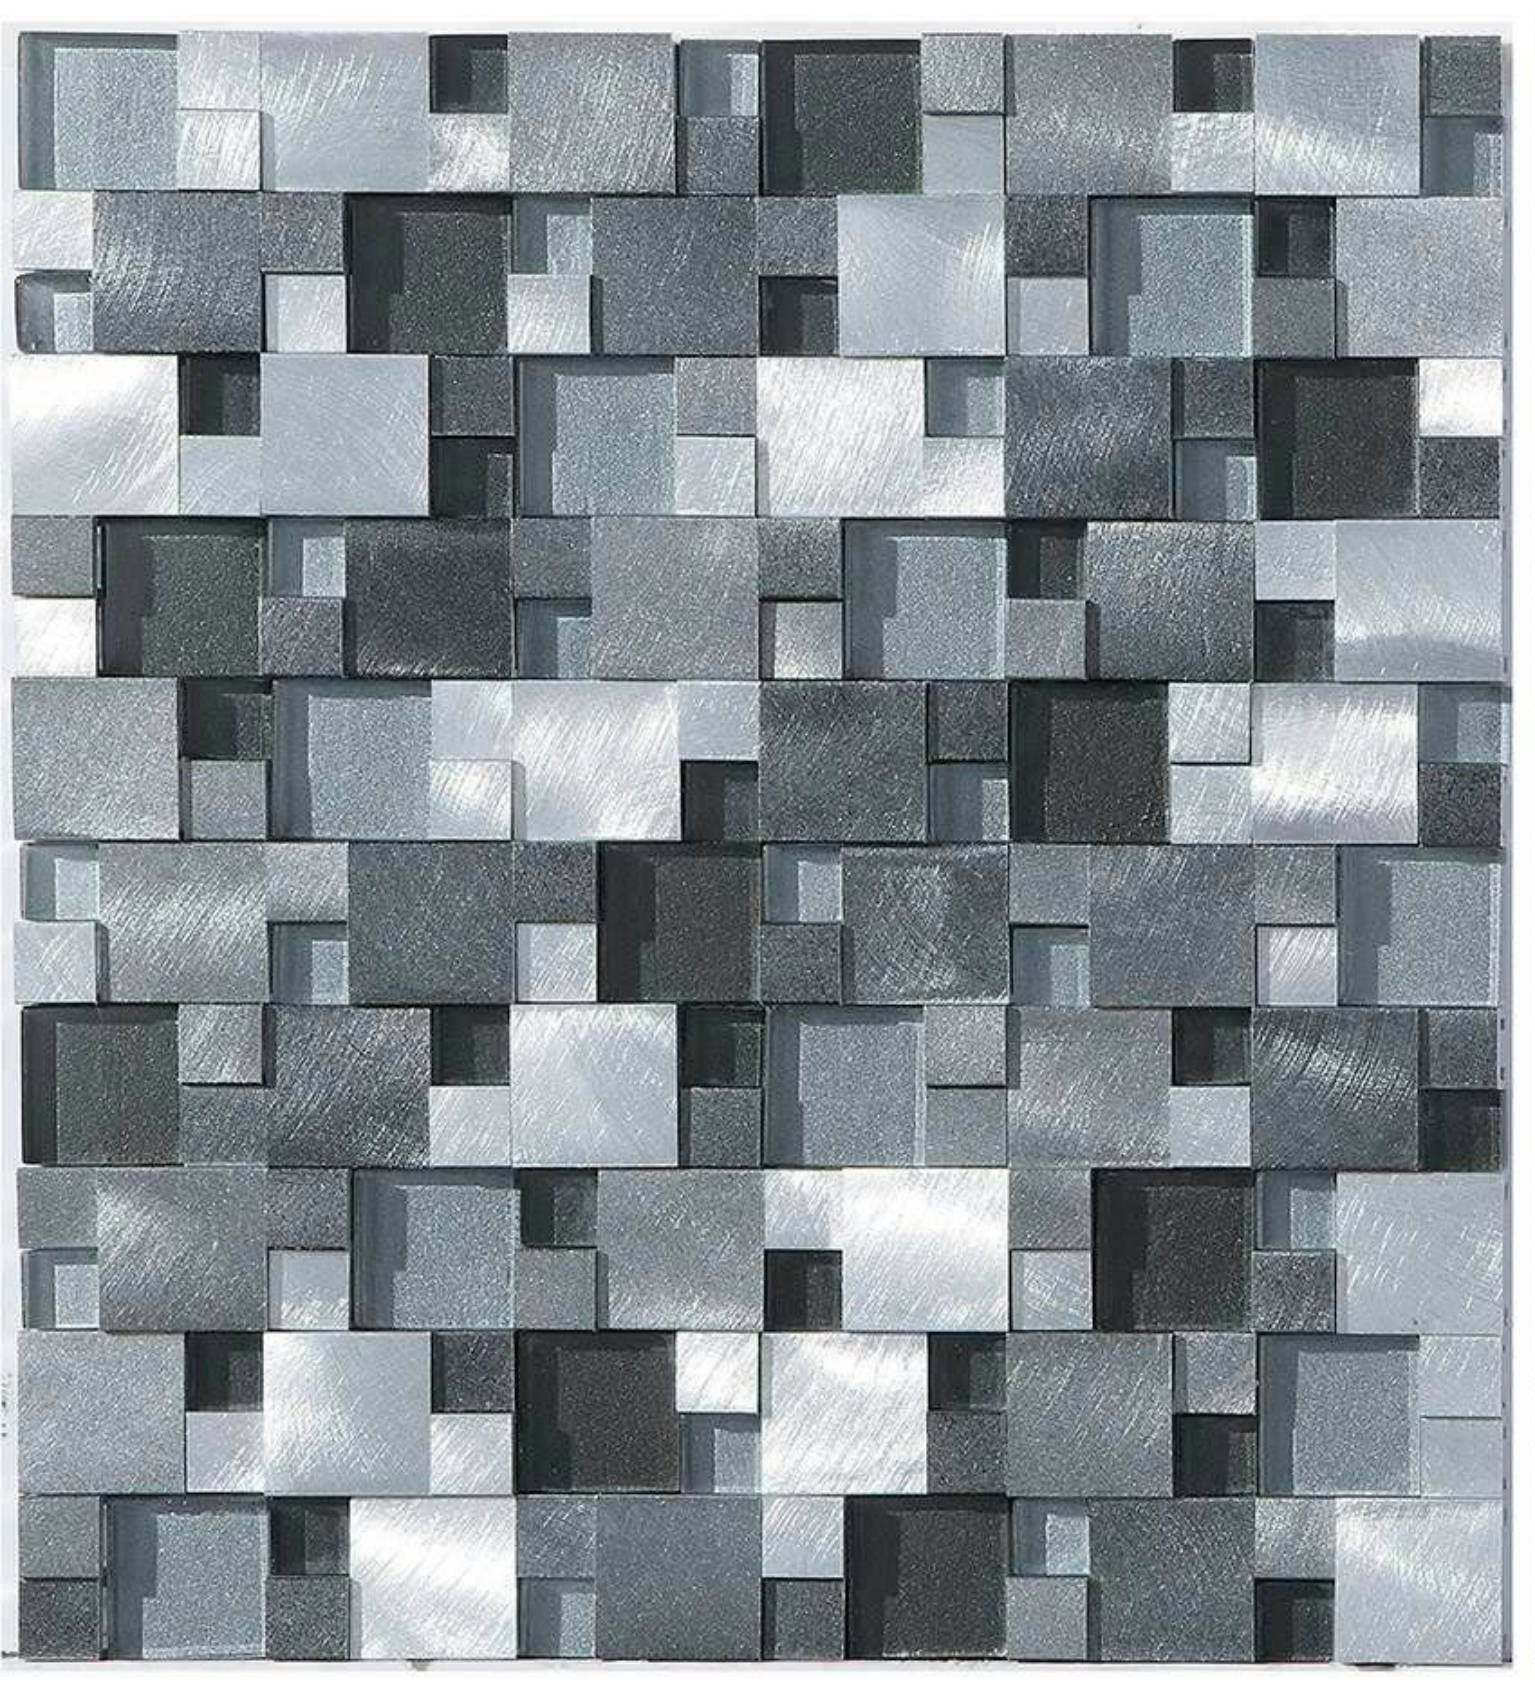 179021 | Stones & More | Finest selection of Mosaics, Glass, Tile and Stone